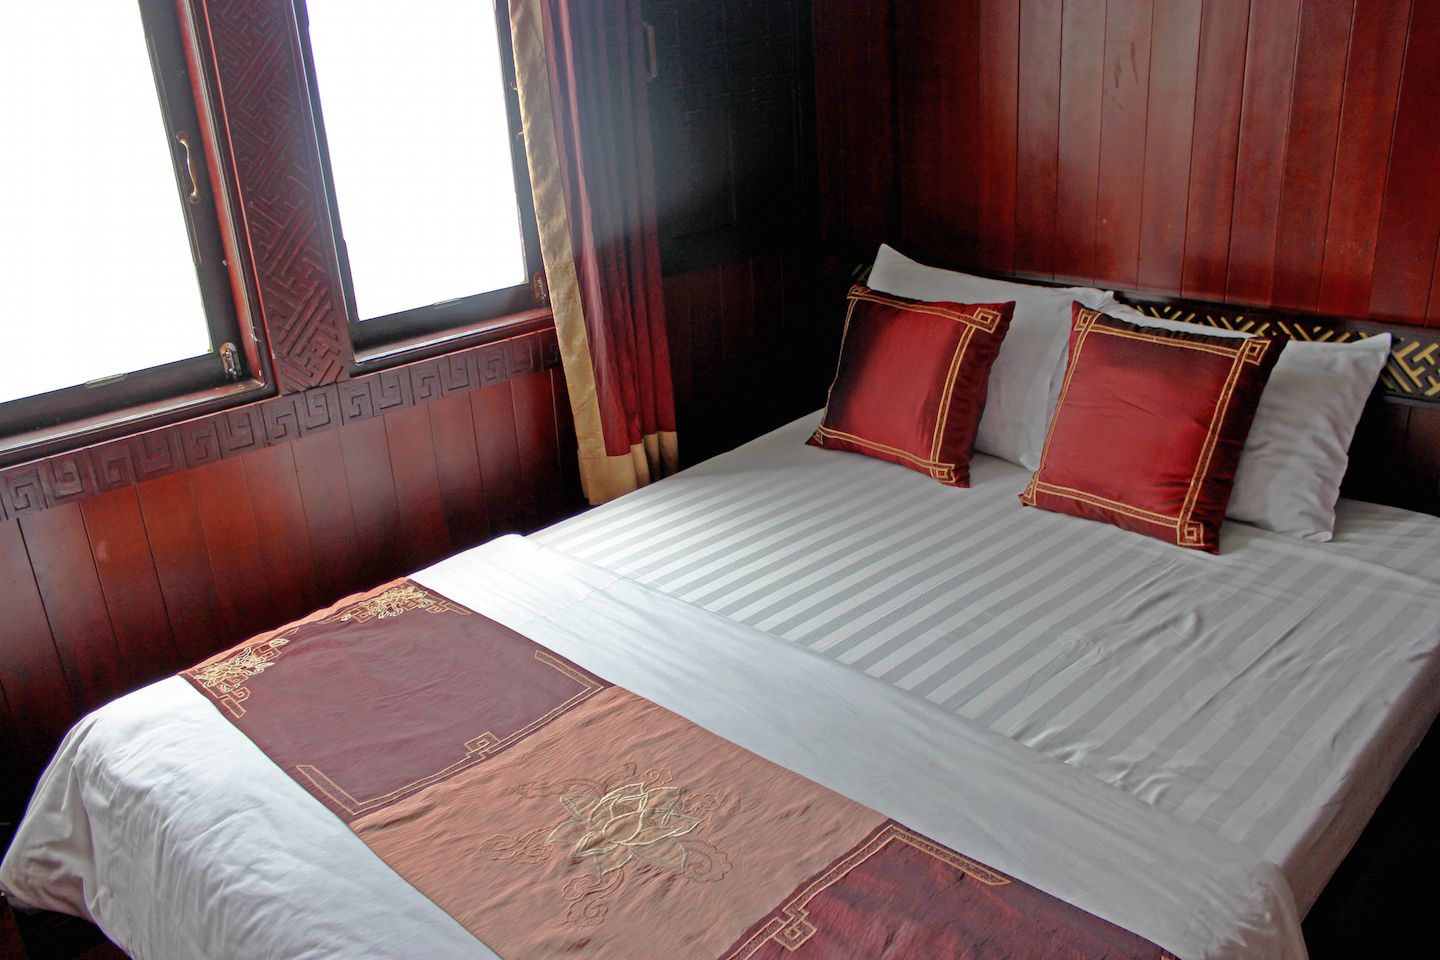 Our room on the boat